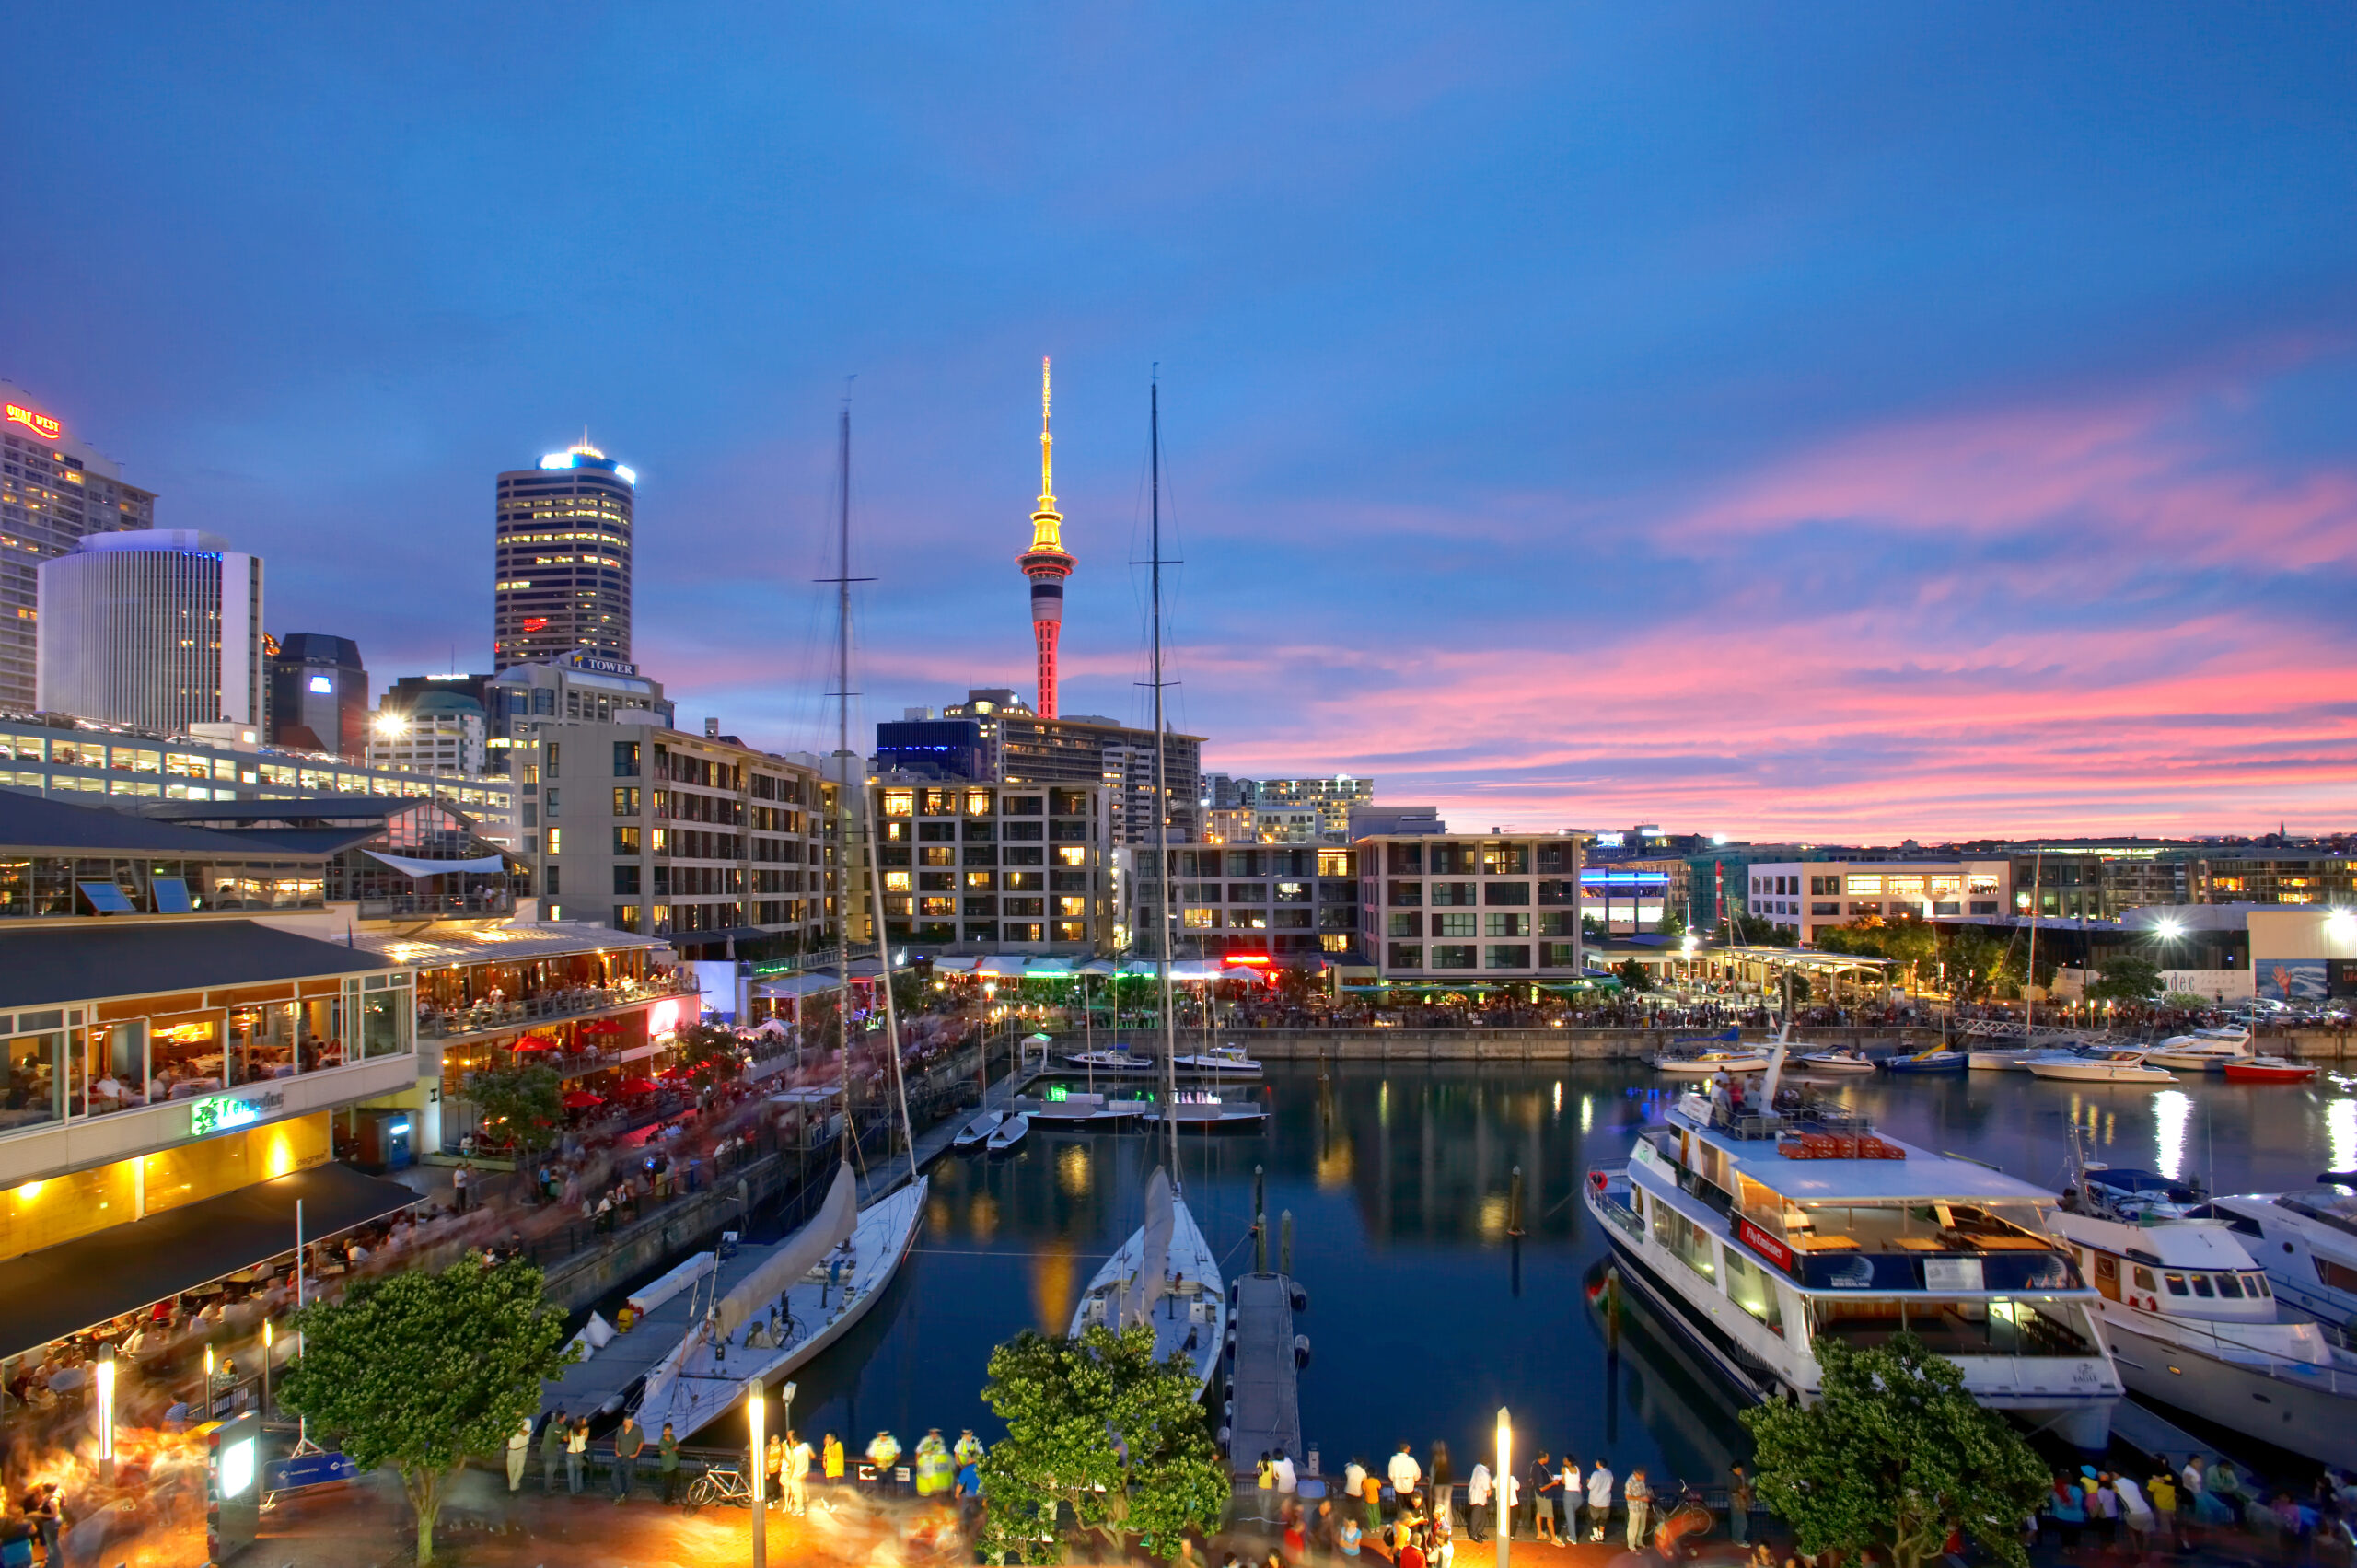 Sunset at Viaduct Harbour. Image by Chris McLennan.